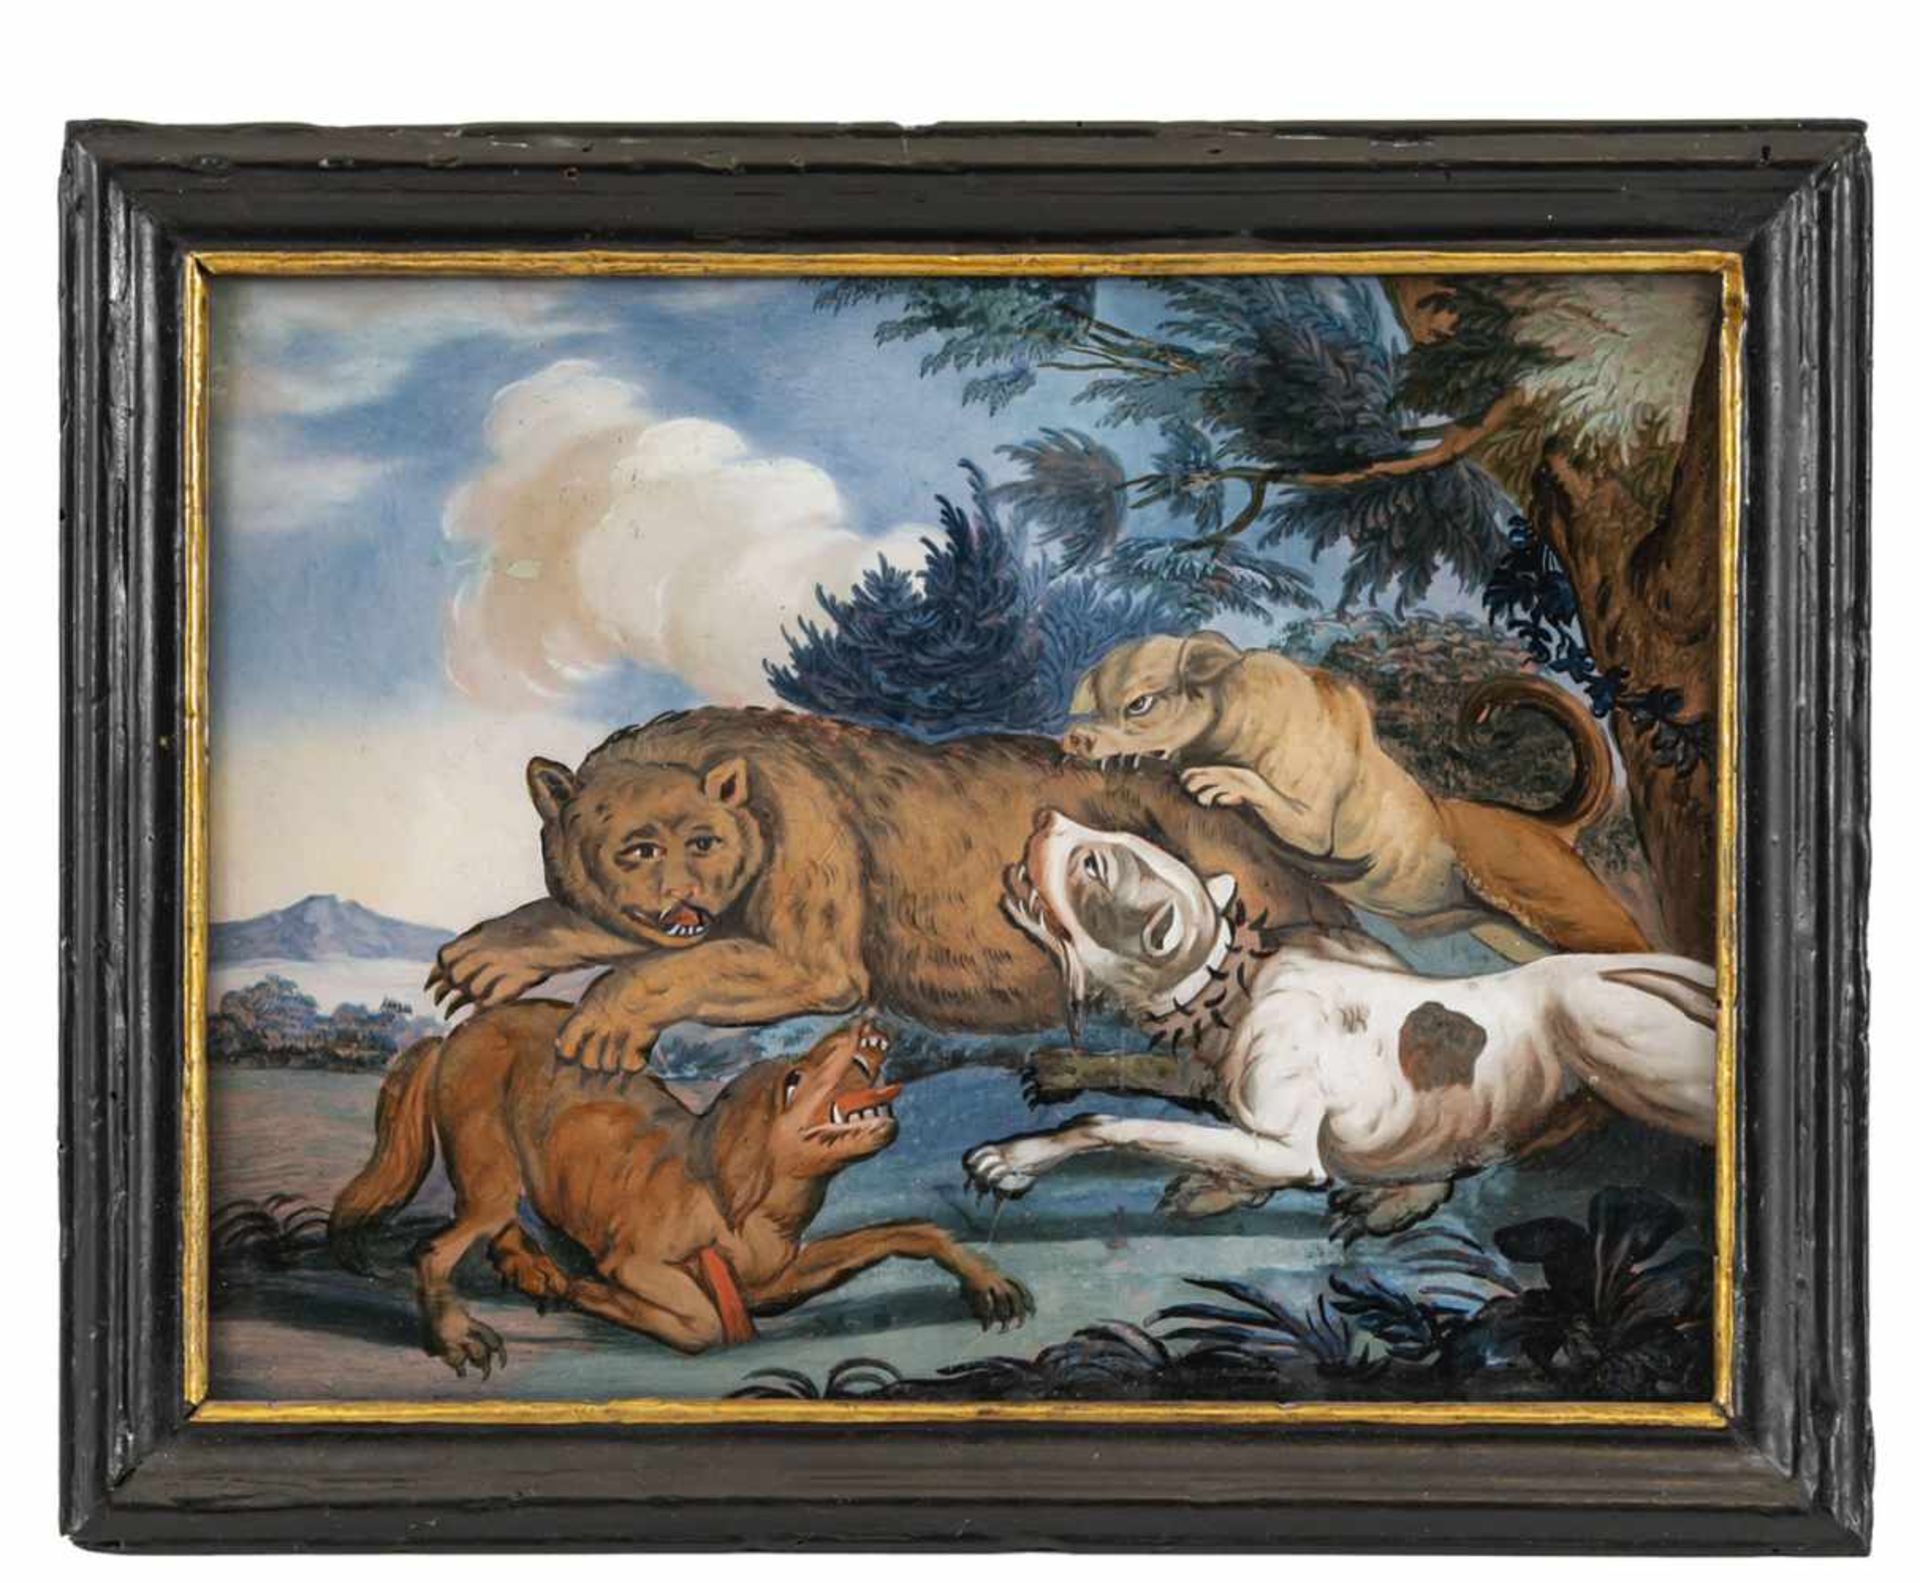 A GLASS PAINTING ON REVERSE depicting a bear hunting, probably Augsburg, middle of 18th century. - Image 2 of 2